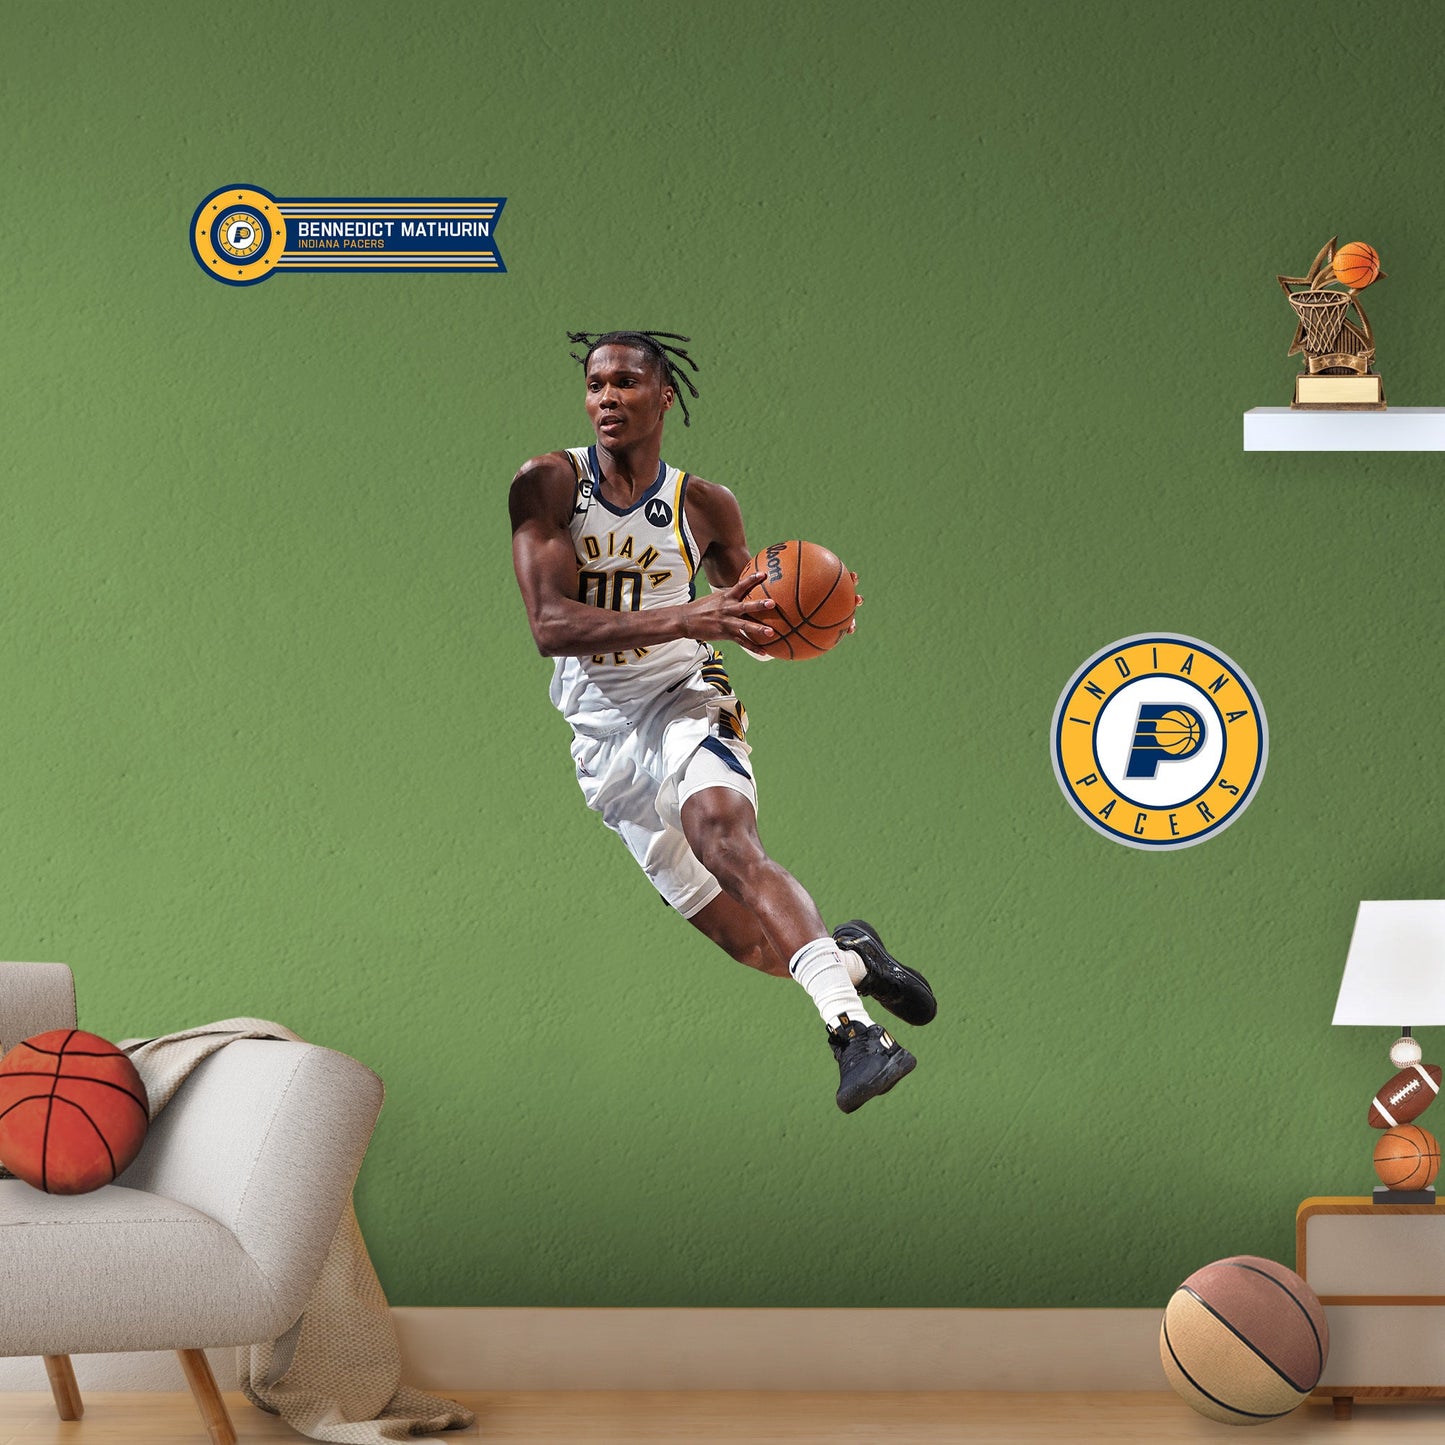 Indiana Pacers: Bennedict Mathurin - Officially Licensed NBA Removable Adhesive Decal